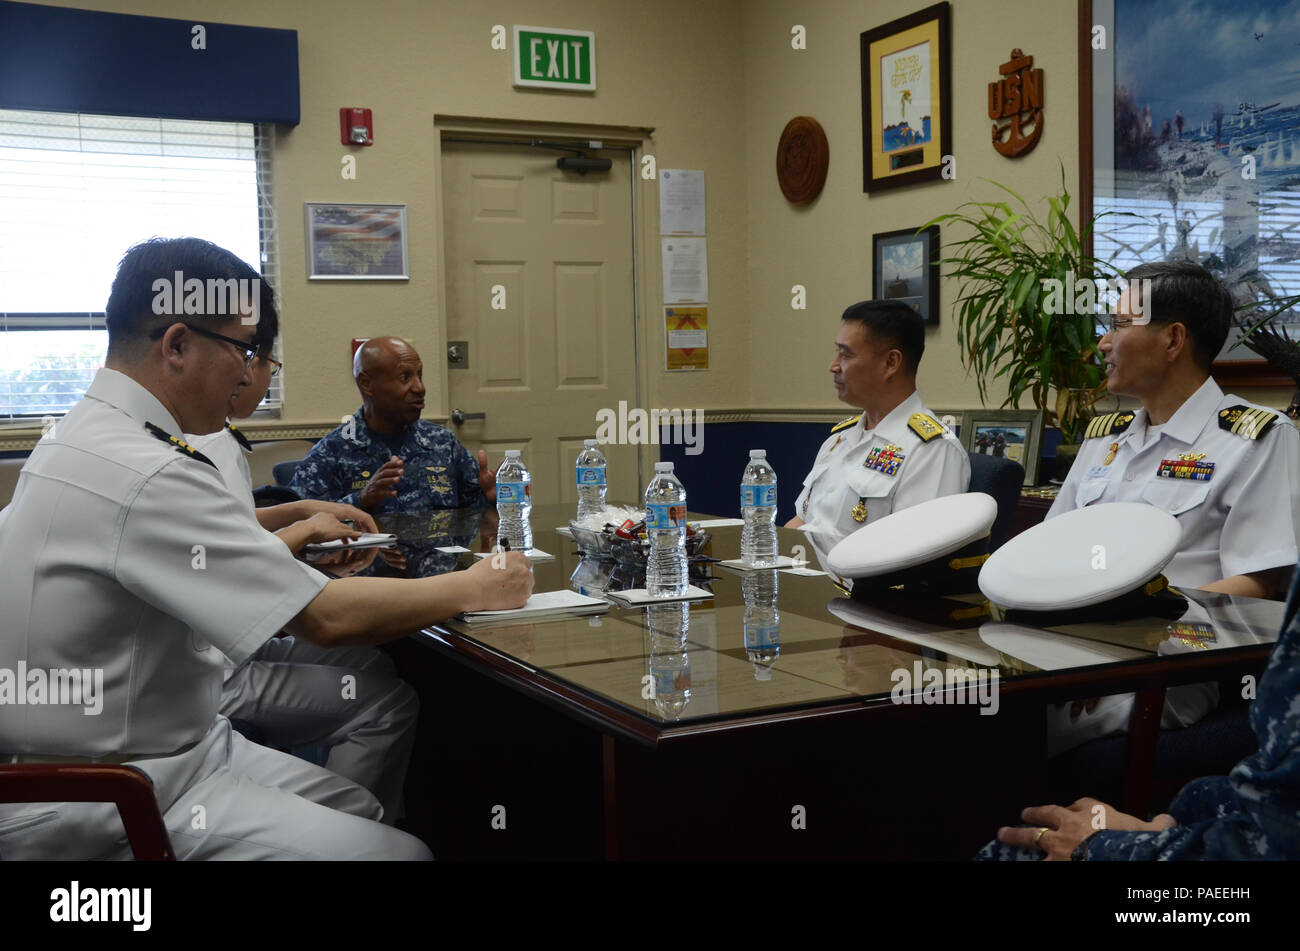 160331-N-YM720-031 SANTA RITA, Guam (March 31, 2016) Rear Adm. Youn Jeong Sang, commander, Submarine Force (CSF), Republic of Korea Navy (ROKN), right center, and other members of the ROKN submarine forces meet with Capt. Andy Anderson, commanding officer, Naval Base Guam, left center, before the first day of the 43rd Submarine Warfare Committee Meeting (SWCM). SWCM is a bilateral discussion between the U.S. and ROKN submarine forces designed to foster the partnership and focuses on submarine tactics, force integraton and future submarine development. (U.S. Navy photo by MC3 Allen McNair/Relea Stock Photo